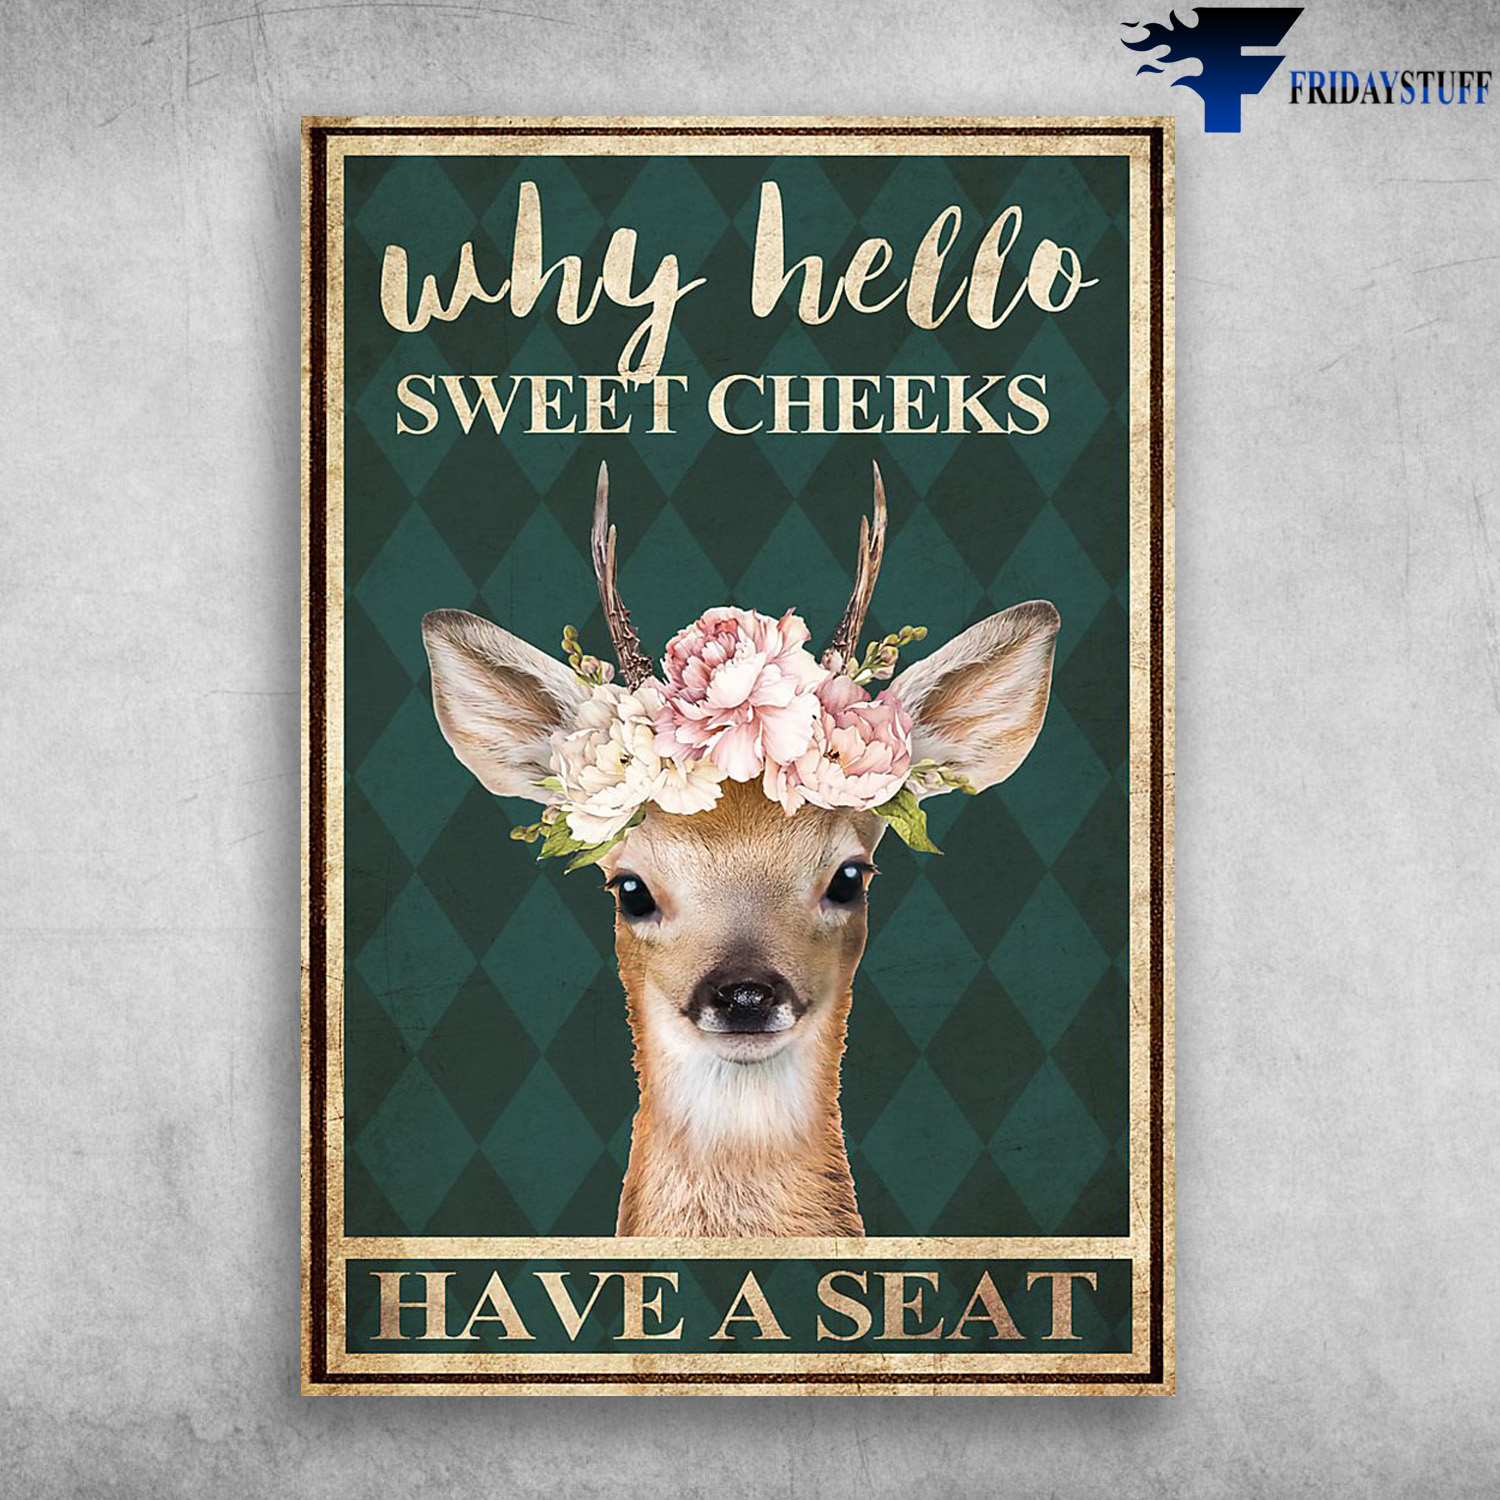 Cute Deer - Why Hello, Sweet Cheeks, Have A Seat